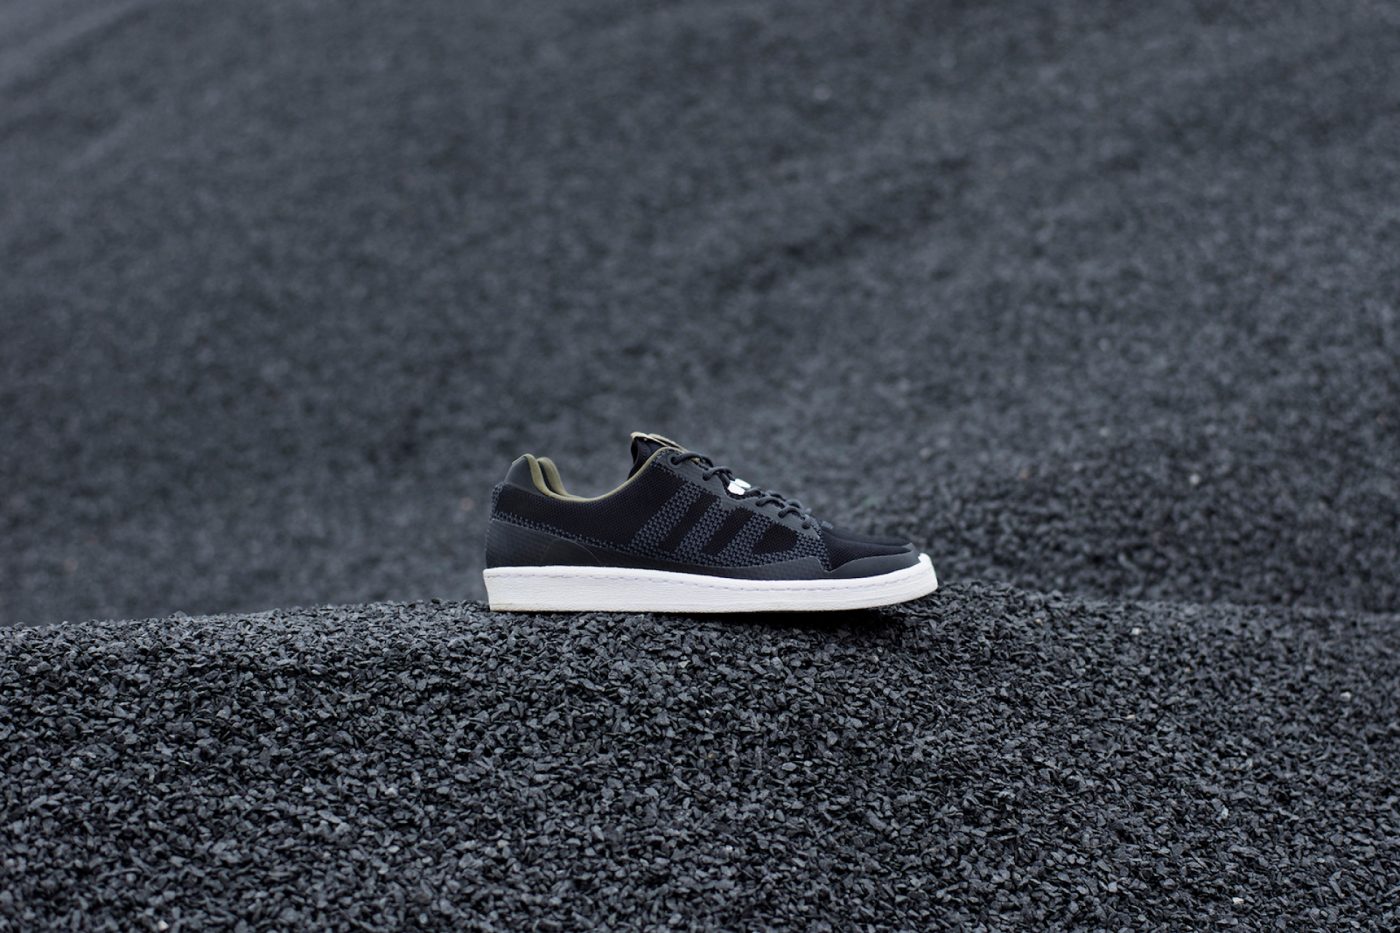 Adidas Consortium x Norse Projects “Layers”